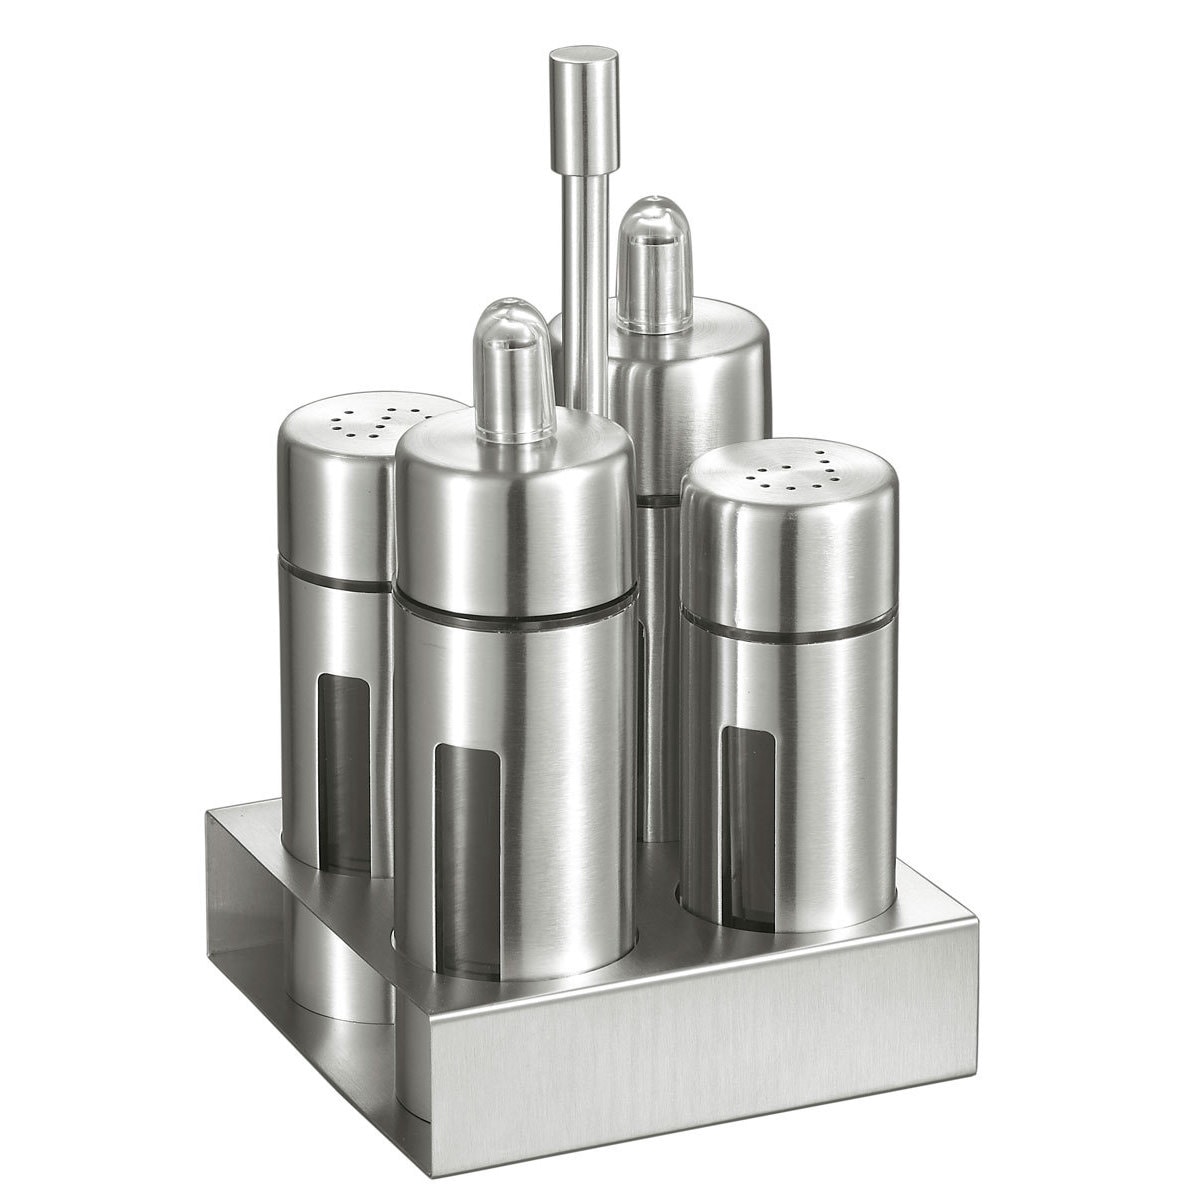 https://ak1.ostkcdn.com/images/products/12037898/Visol-Foxdale-Stainless-Steel-Salt-Pepper-Oil-and-Vinegar-Bottles-with-Stand-f72d8619-e7e9-4e65-ab9d-b05a9762ac85.jpg